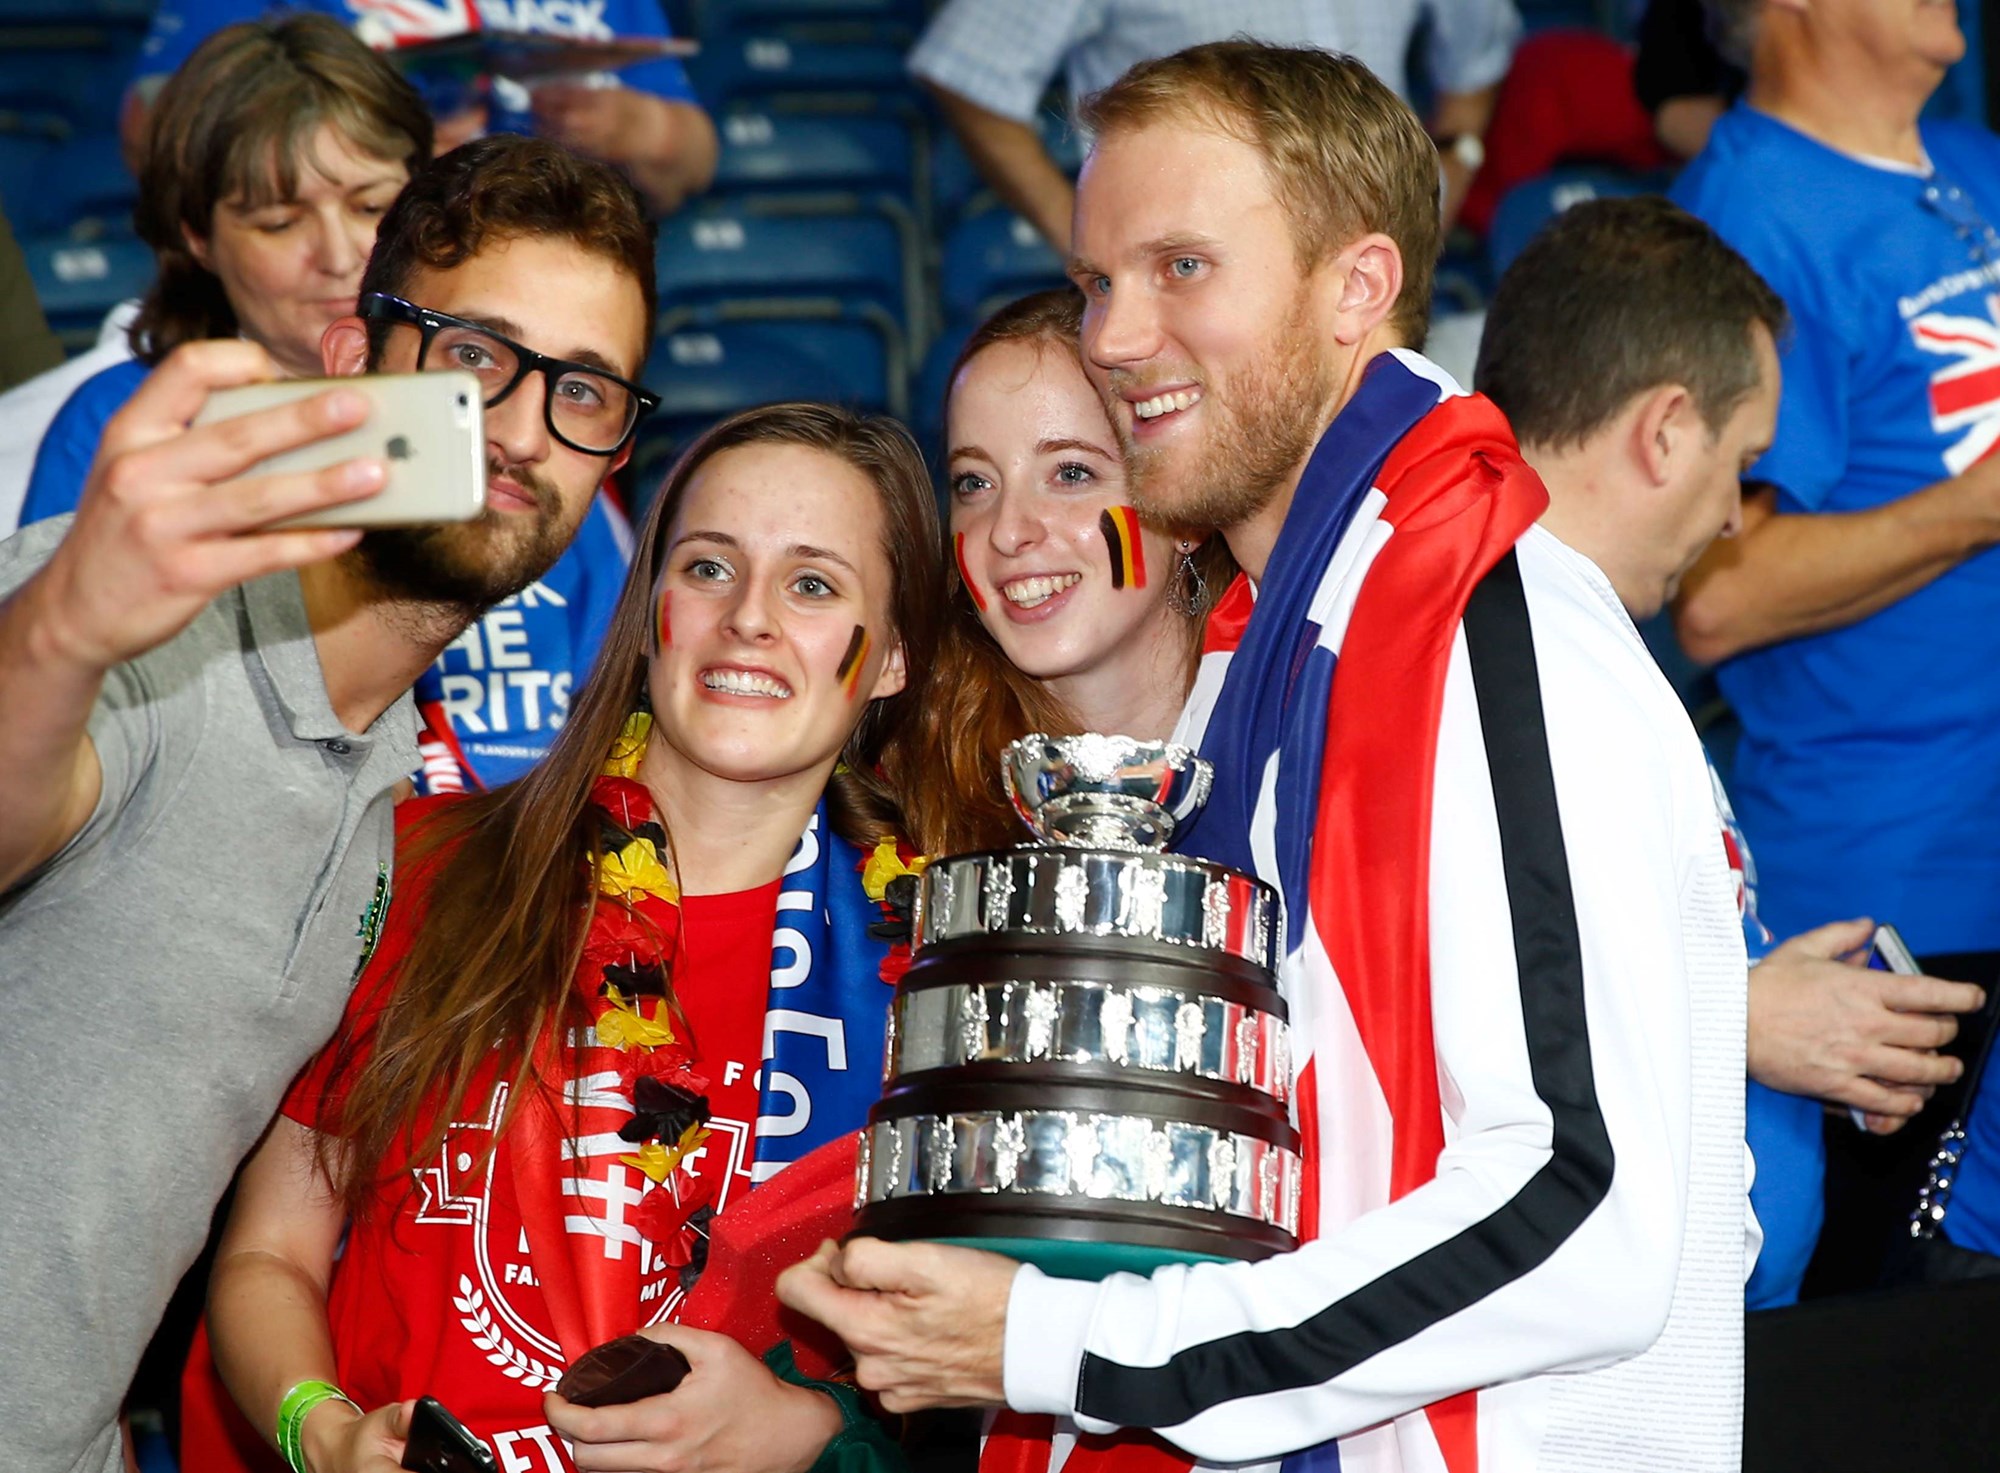 Dom Inglot celebrating with fans at the 2015 Davis Cup finals